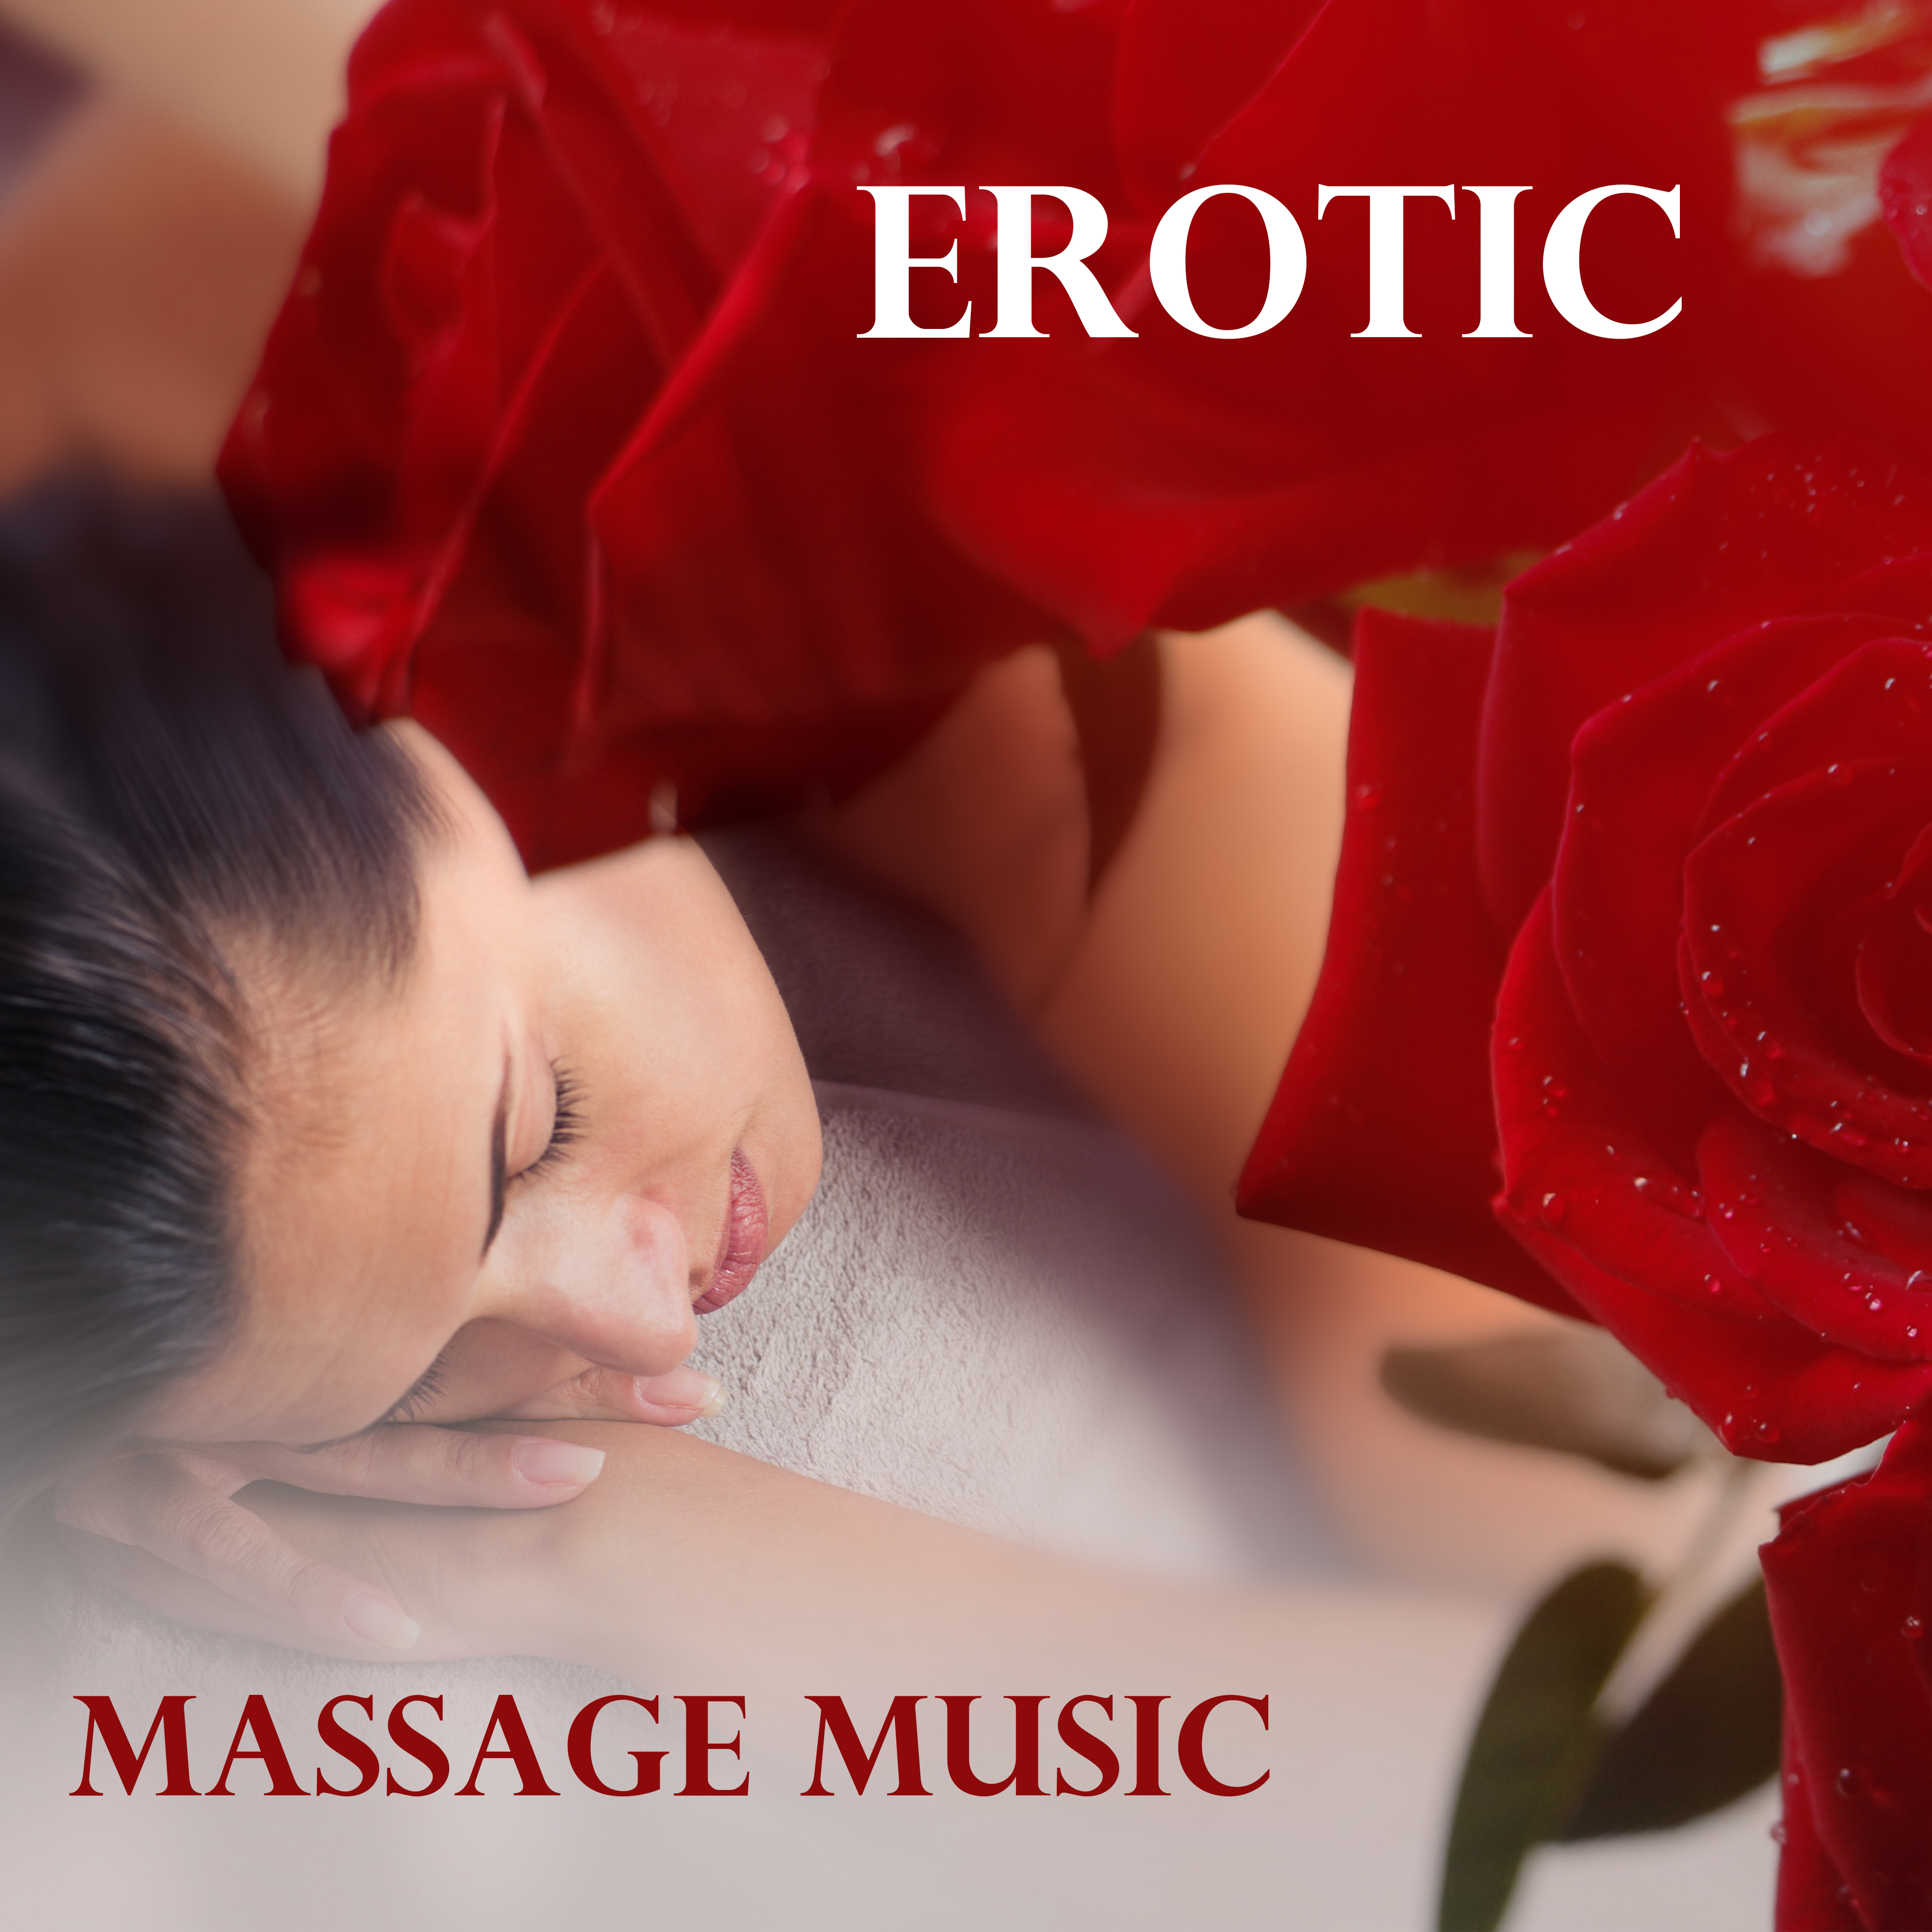 Erotic Massage Music – Calm Sounds to Relax, Love Music, New Age Melodies